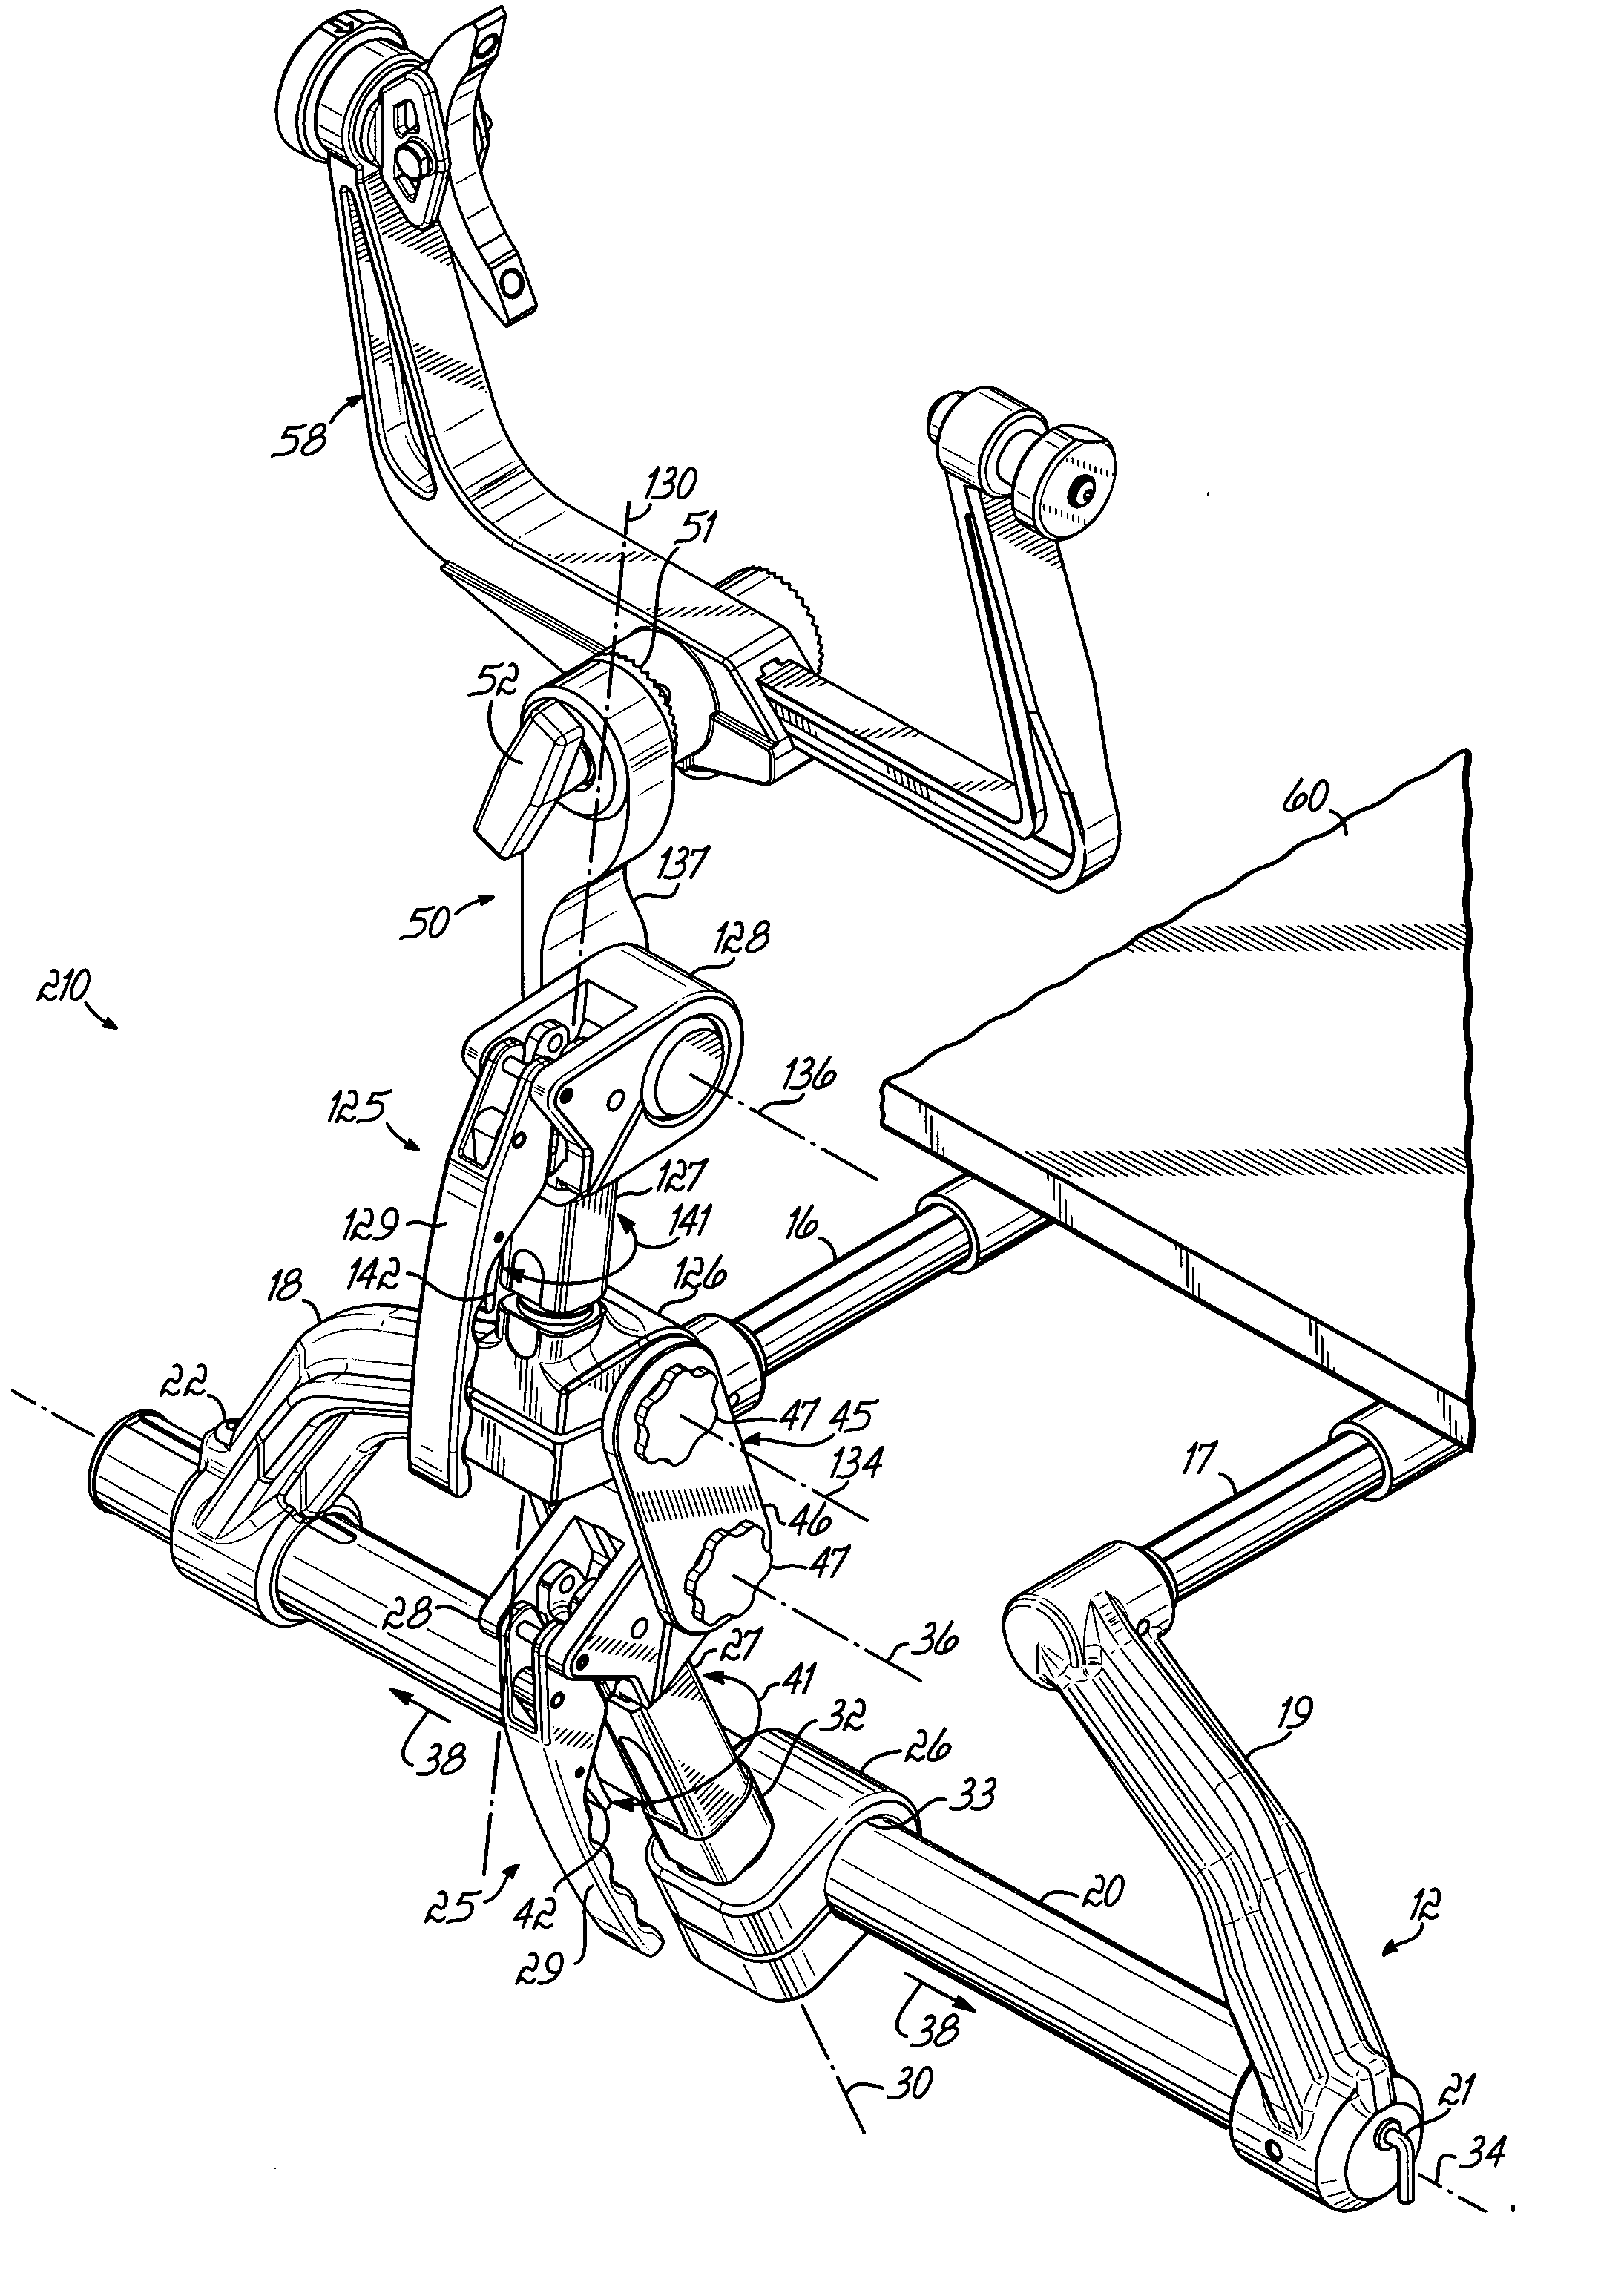 Head support base unit with multi-directional capability